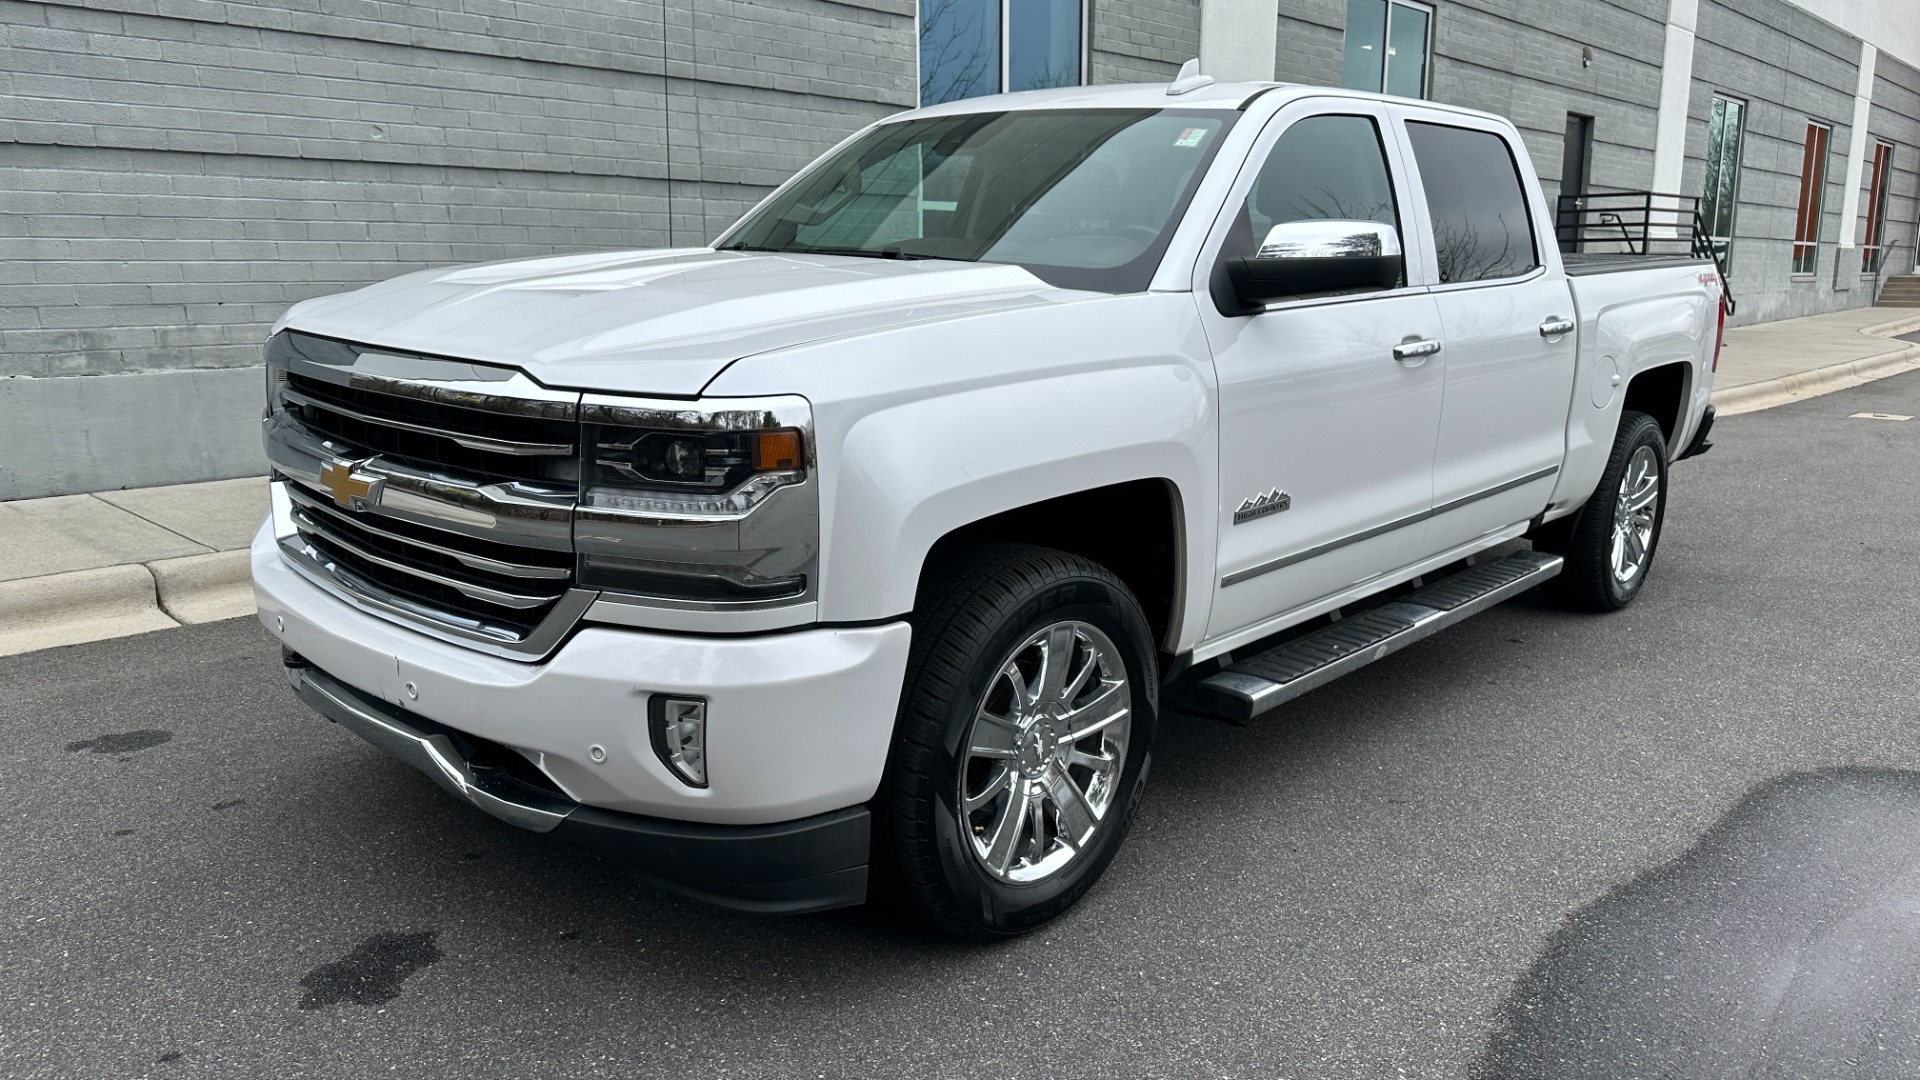 Used 2016 Chevrolet Silverado 1500 HIGH COUNTRY / PREMIUM PACKAGE / PEARL PAINT / SUNROOF / 4X4 for sale Sold at Formula Imports in Charlotte NC 28227 2